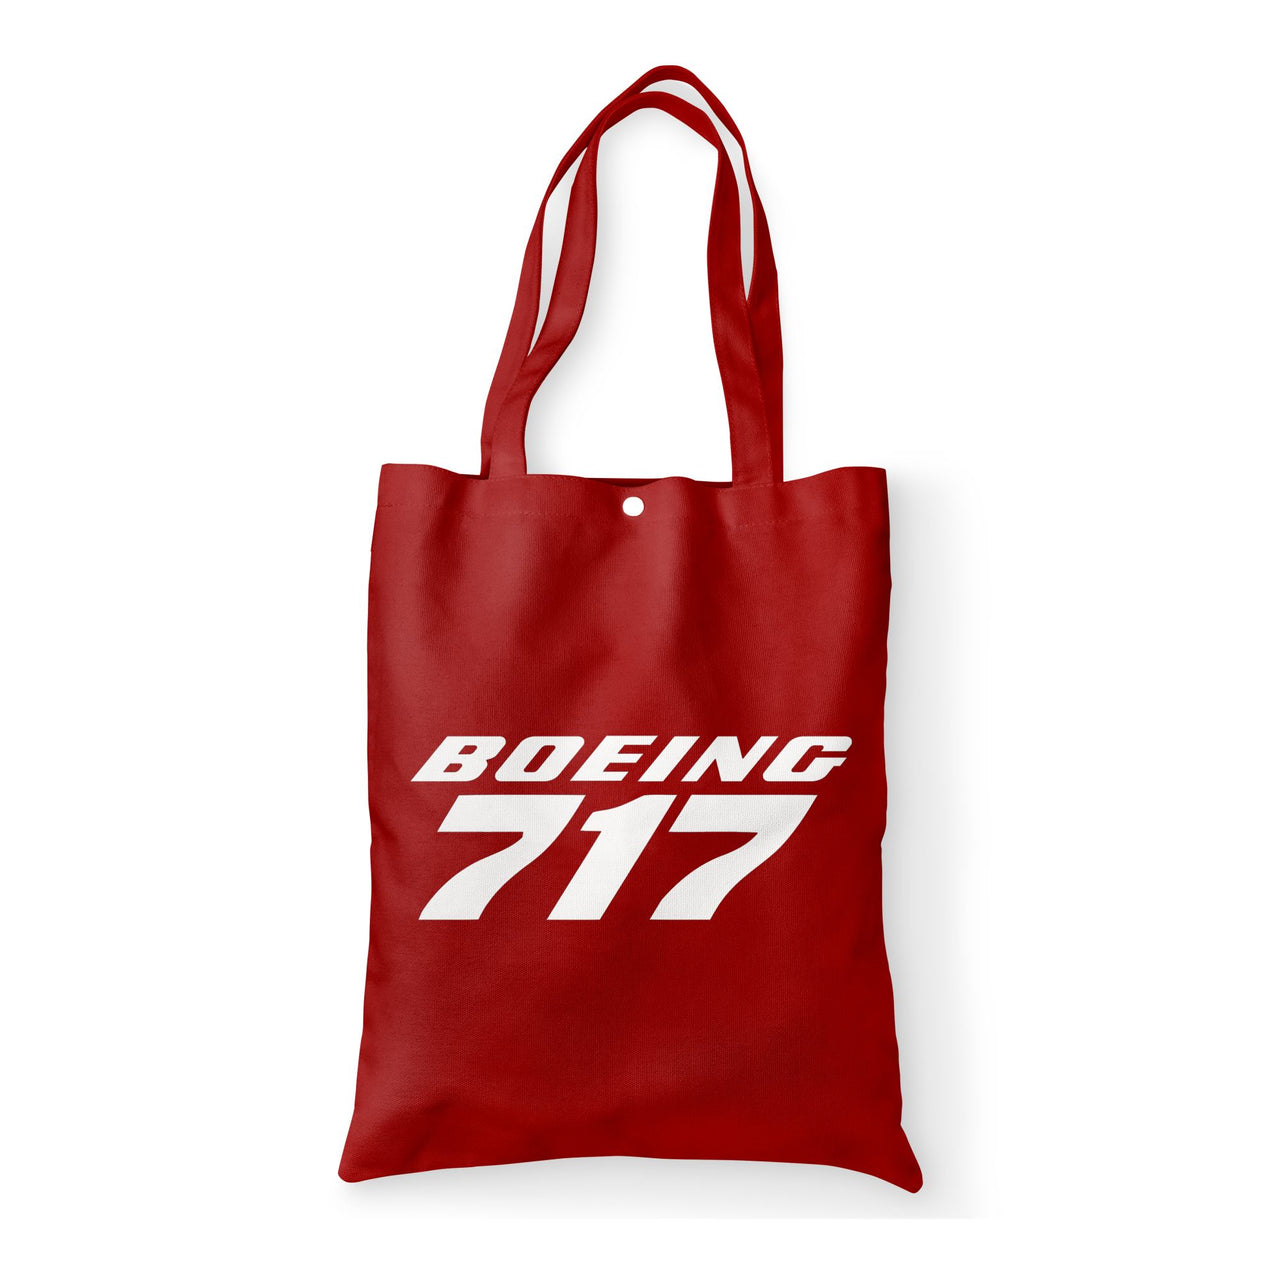 Boeing 717 & Text Designed Tote Bags